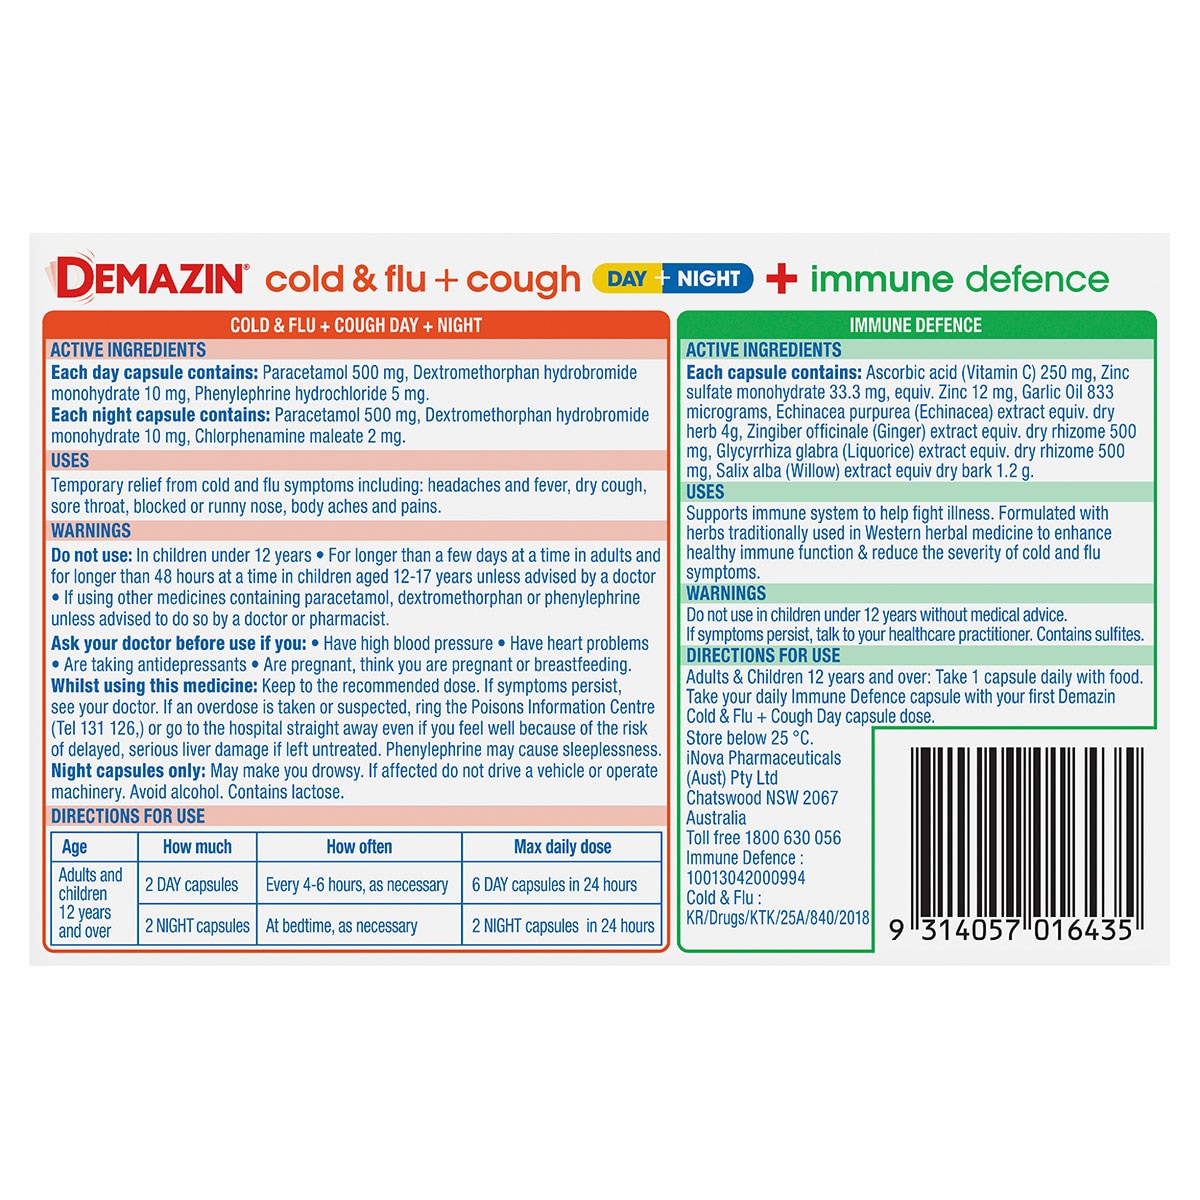 Demazin Ultra Cough Cold and Flu + Immune Defence 34 Tablets